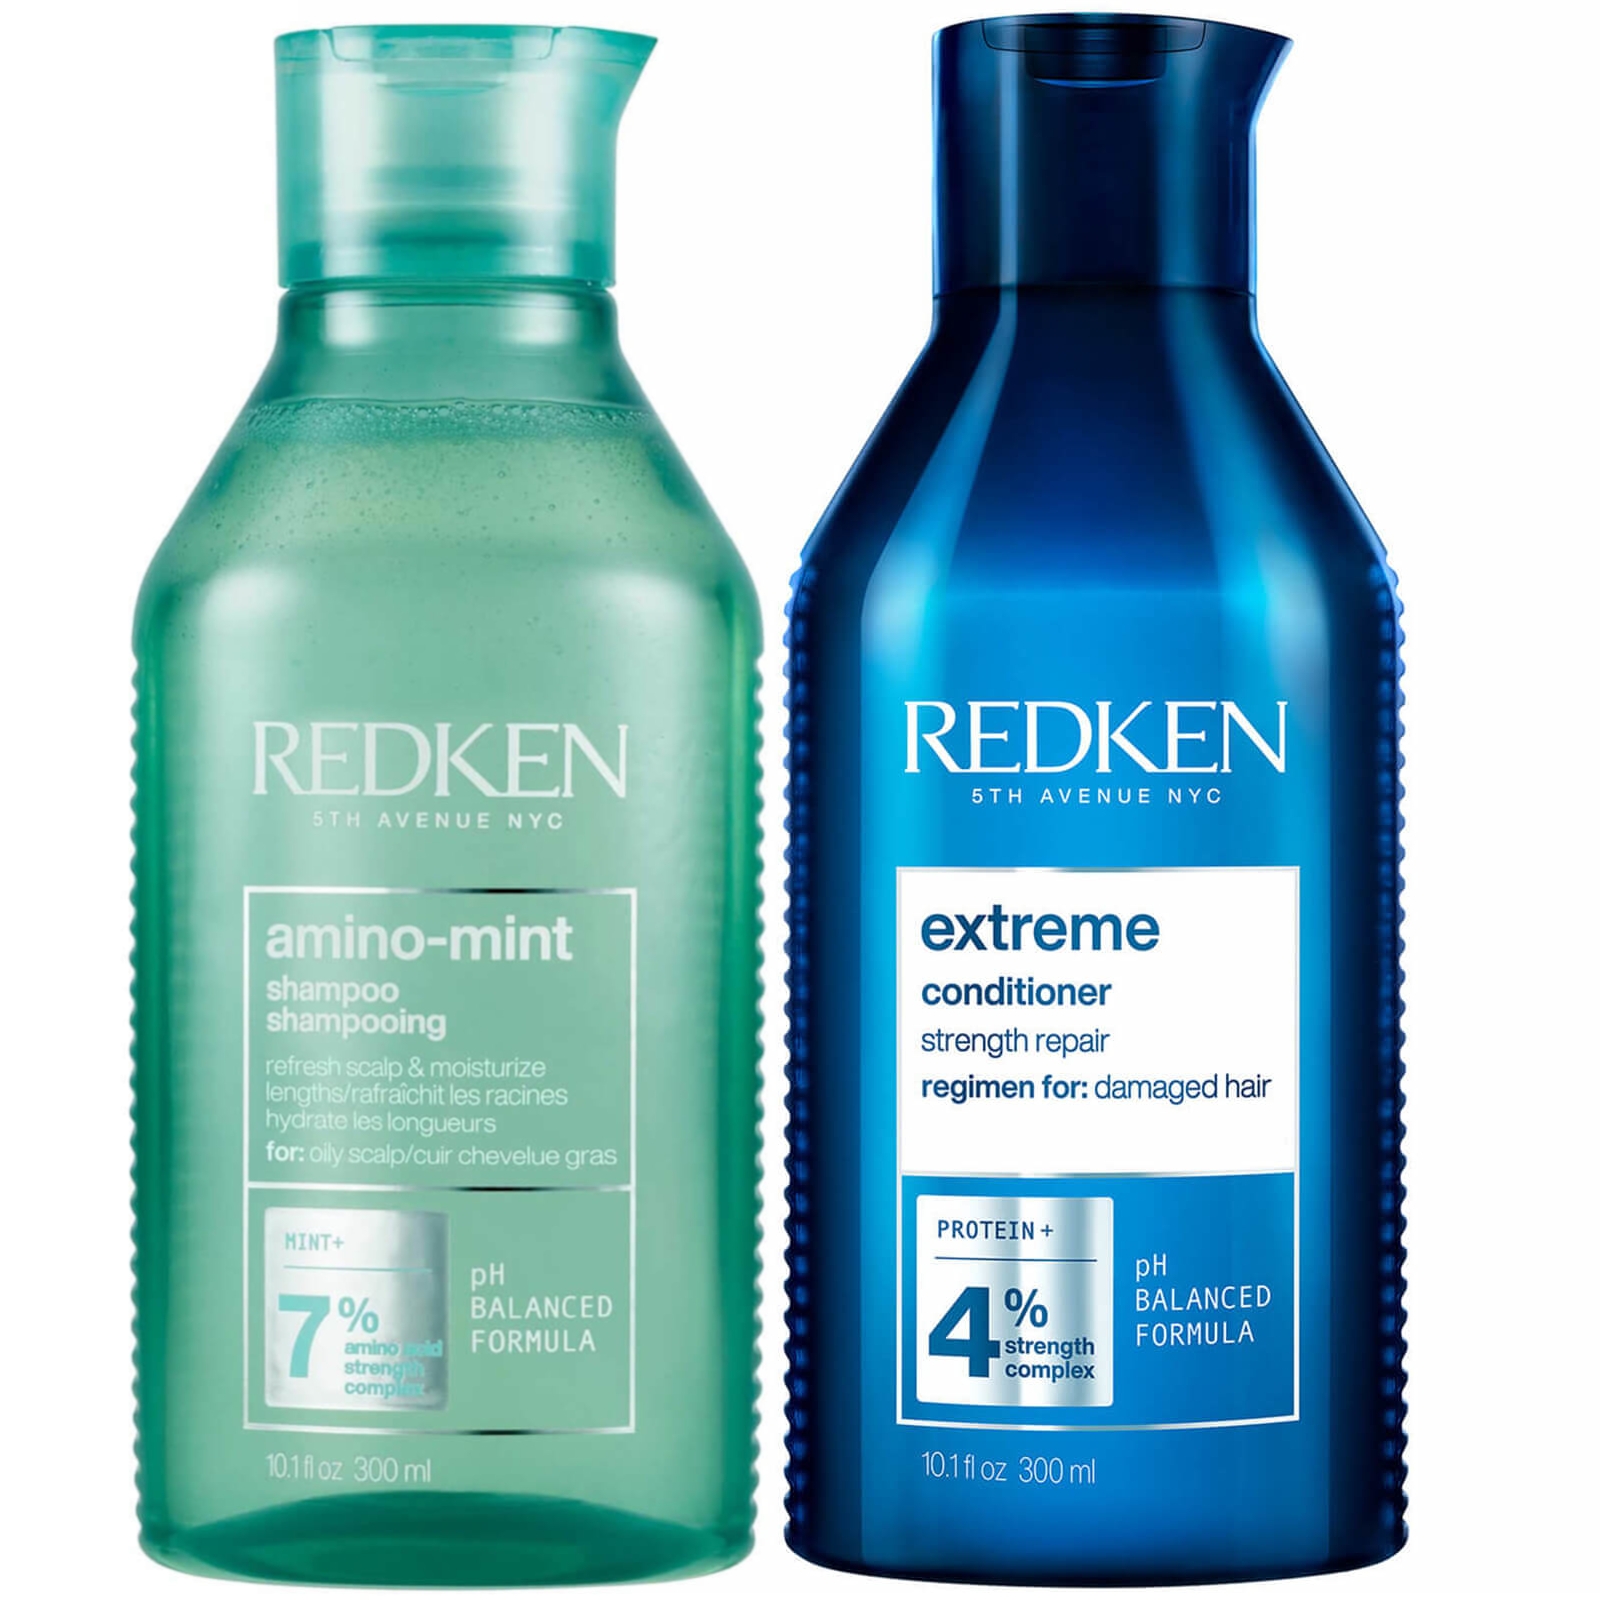 Redken Amino Mint Scalp Cleansing for Greasy Hair Shampoo and Extreme Damage Repair Conditioner Bund